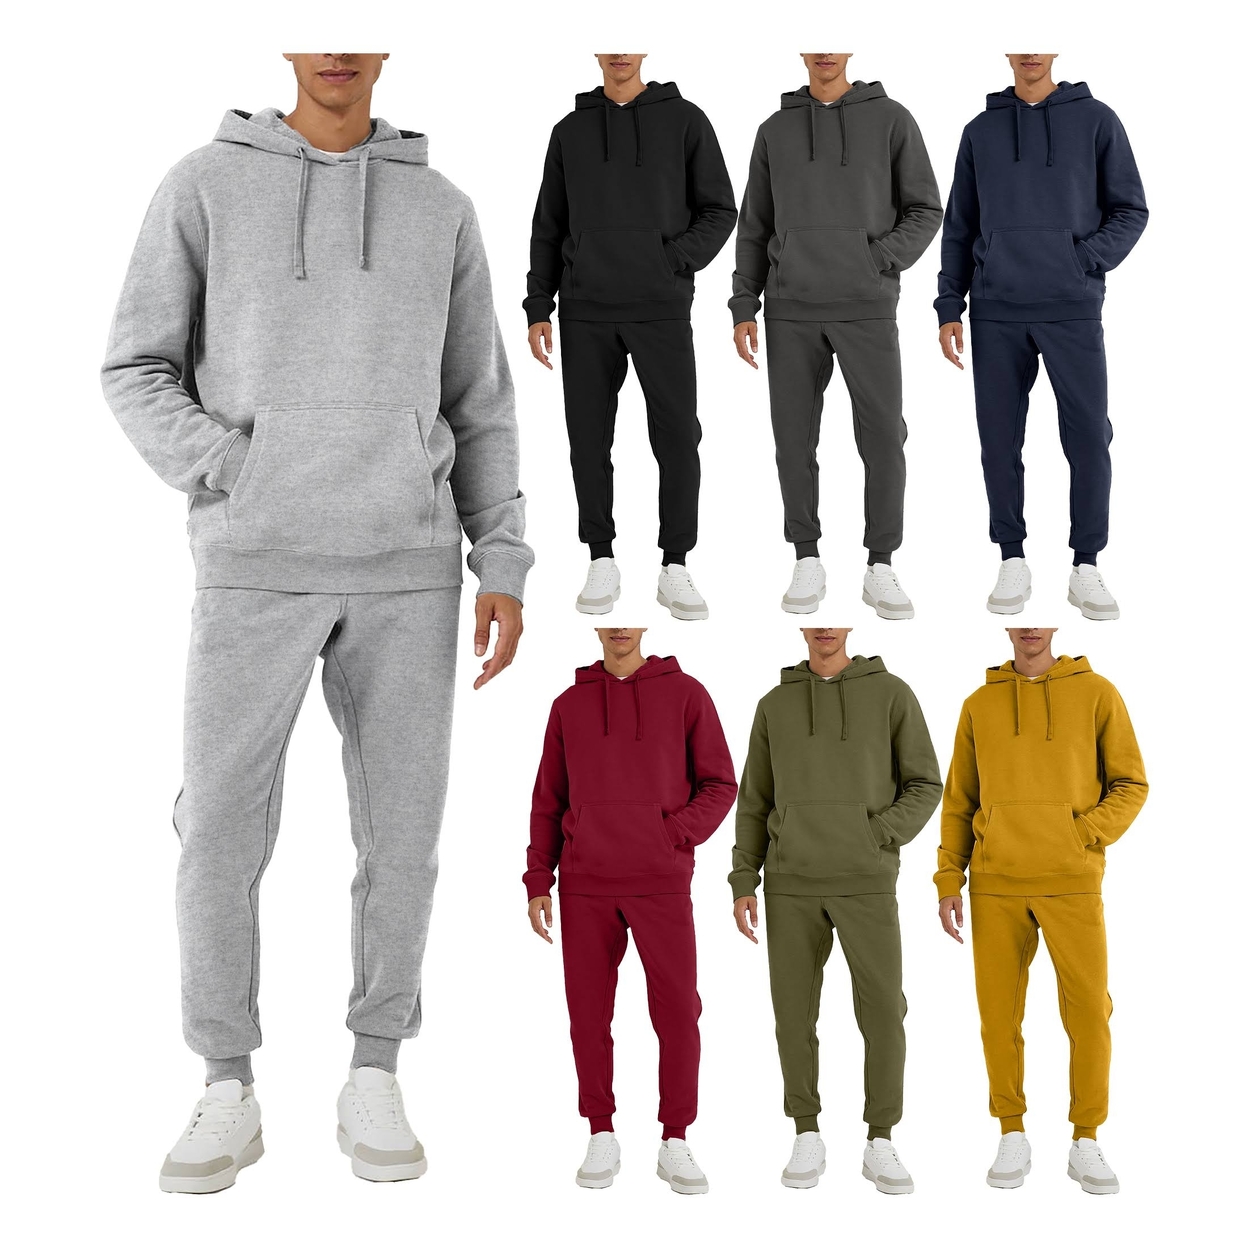 2-Pack: Men's Big & Tall Athletic Active Jogging Winter Warm Fleece Lined Pullover Tracksuit Set - Grey, Xx-large